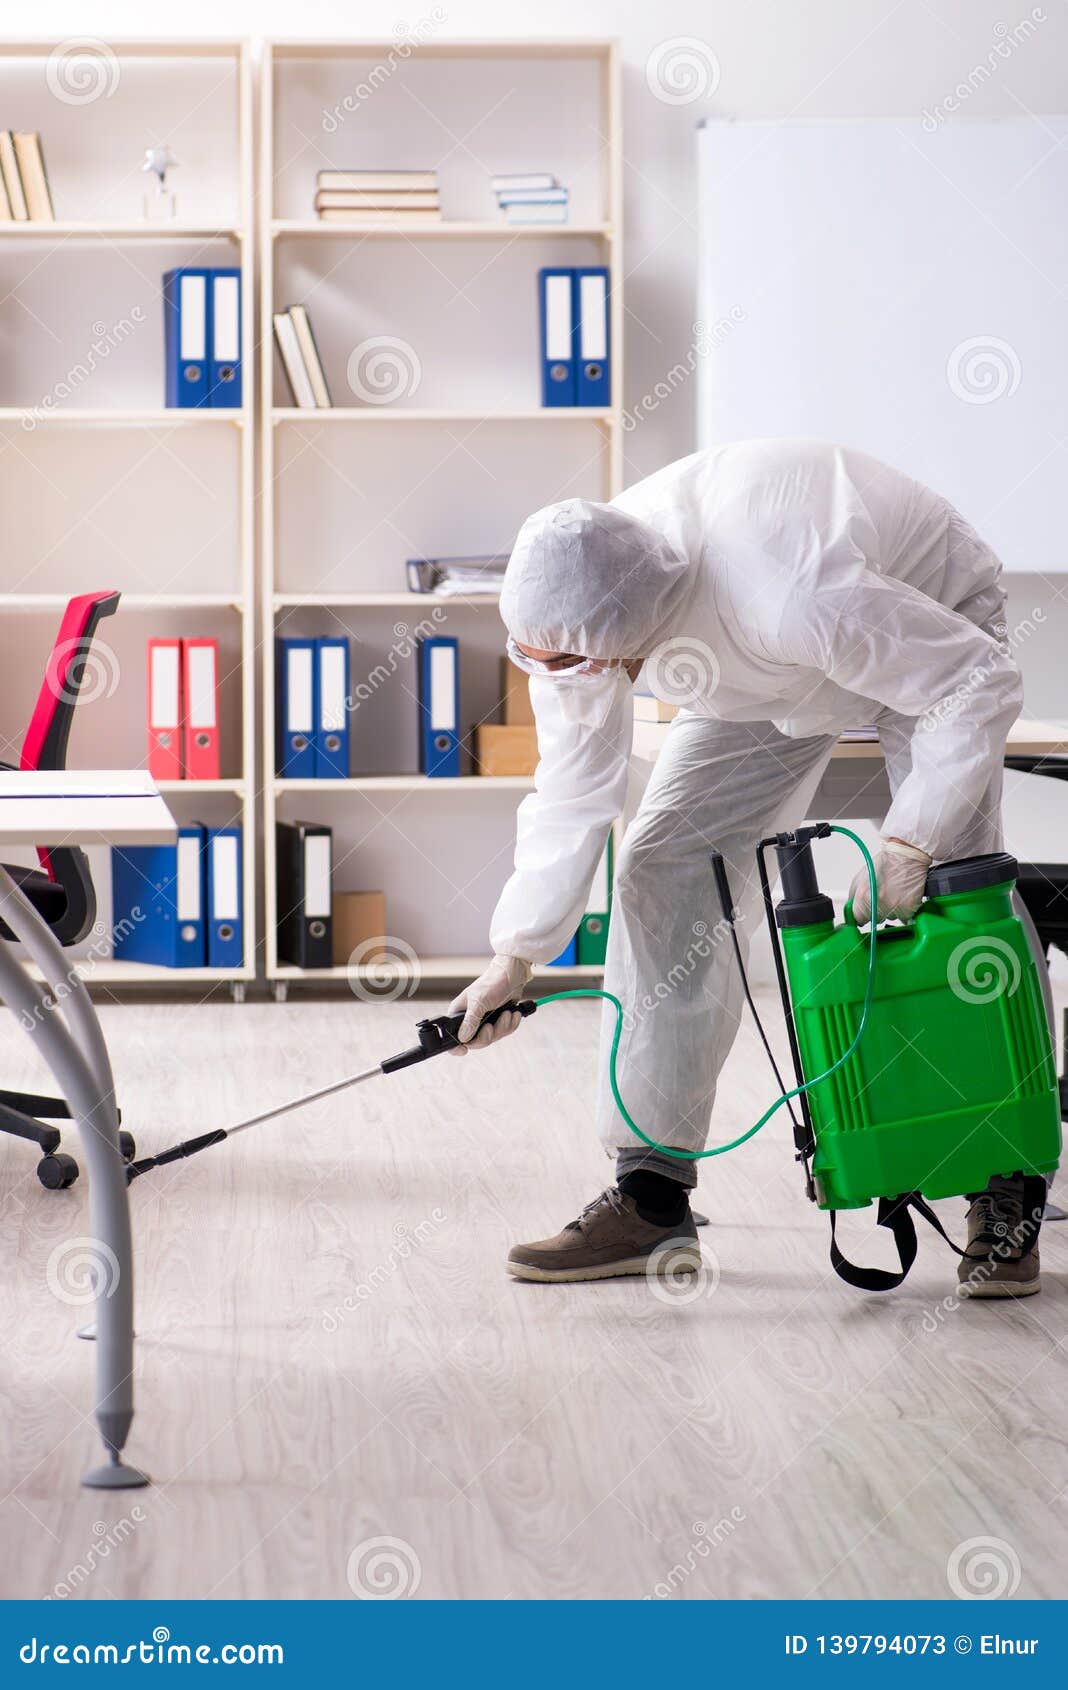 The Professional Contractor Doing Pest Control At Office Stock Image - Image of invasion ...